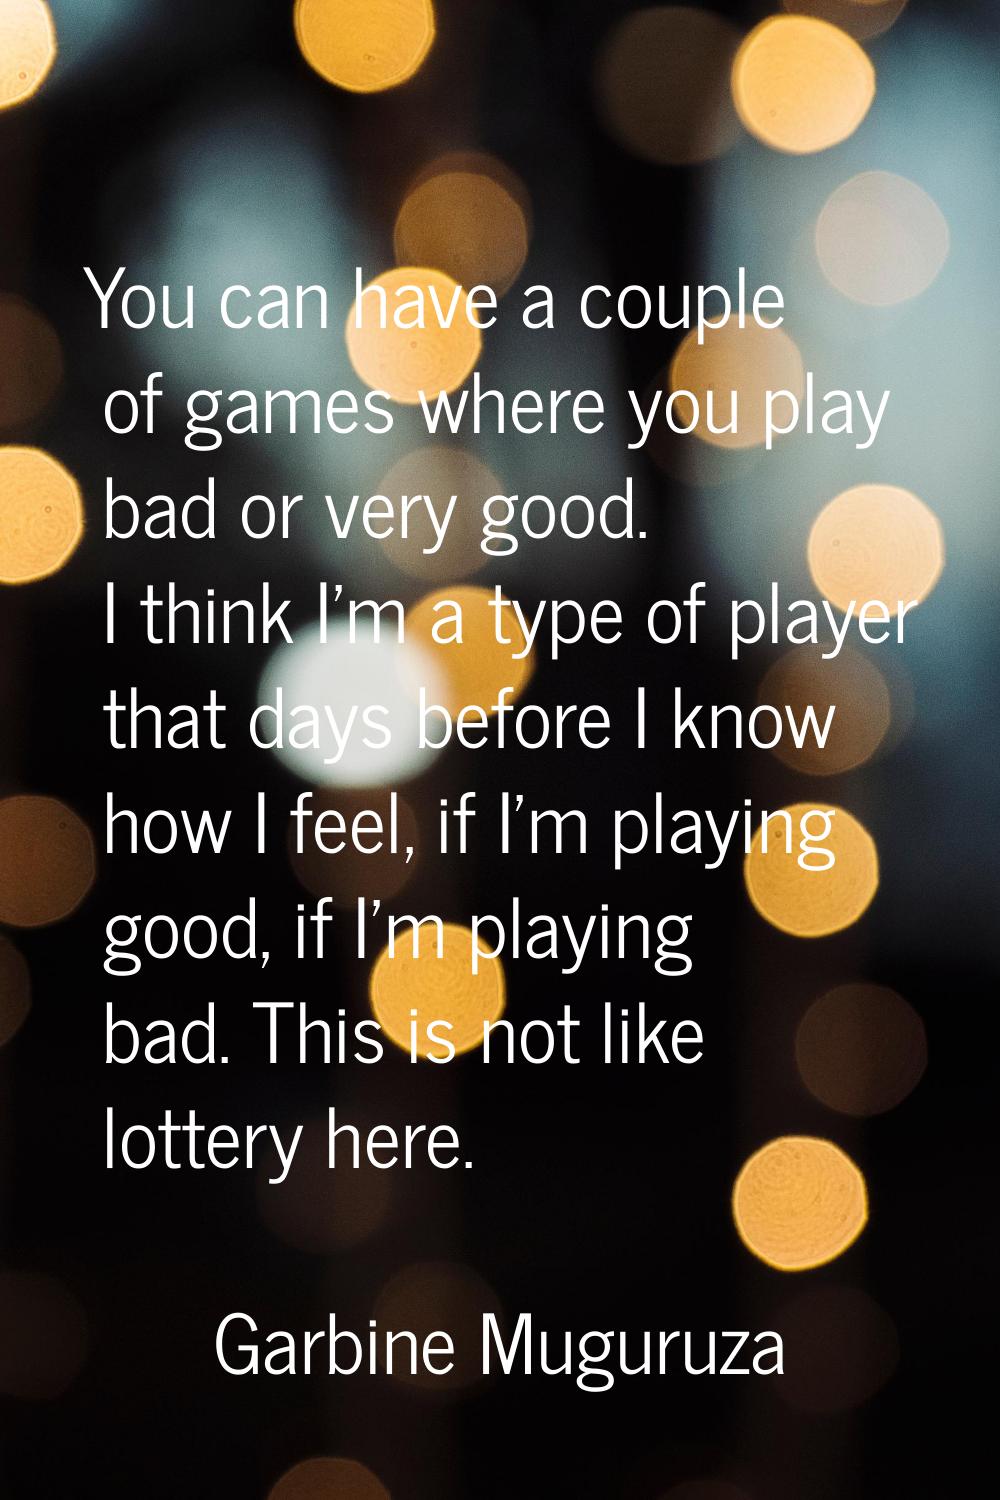 You can have a couple of games where you play bad or very good. I think I'm a type of player that d